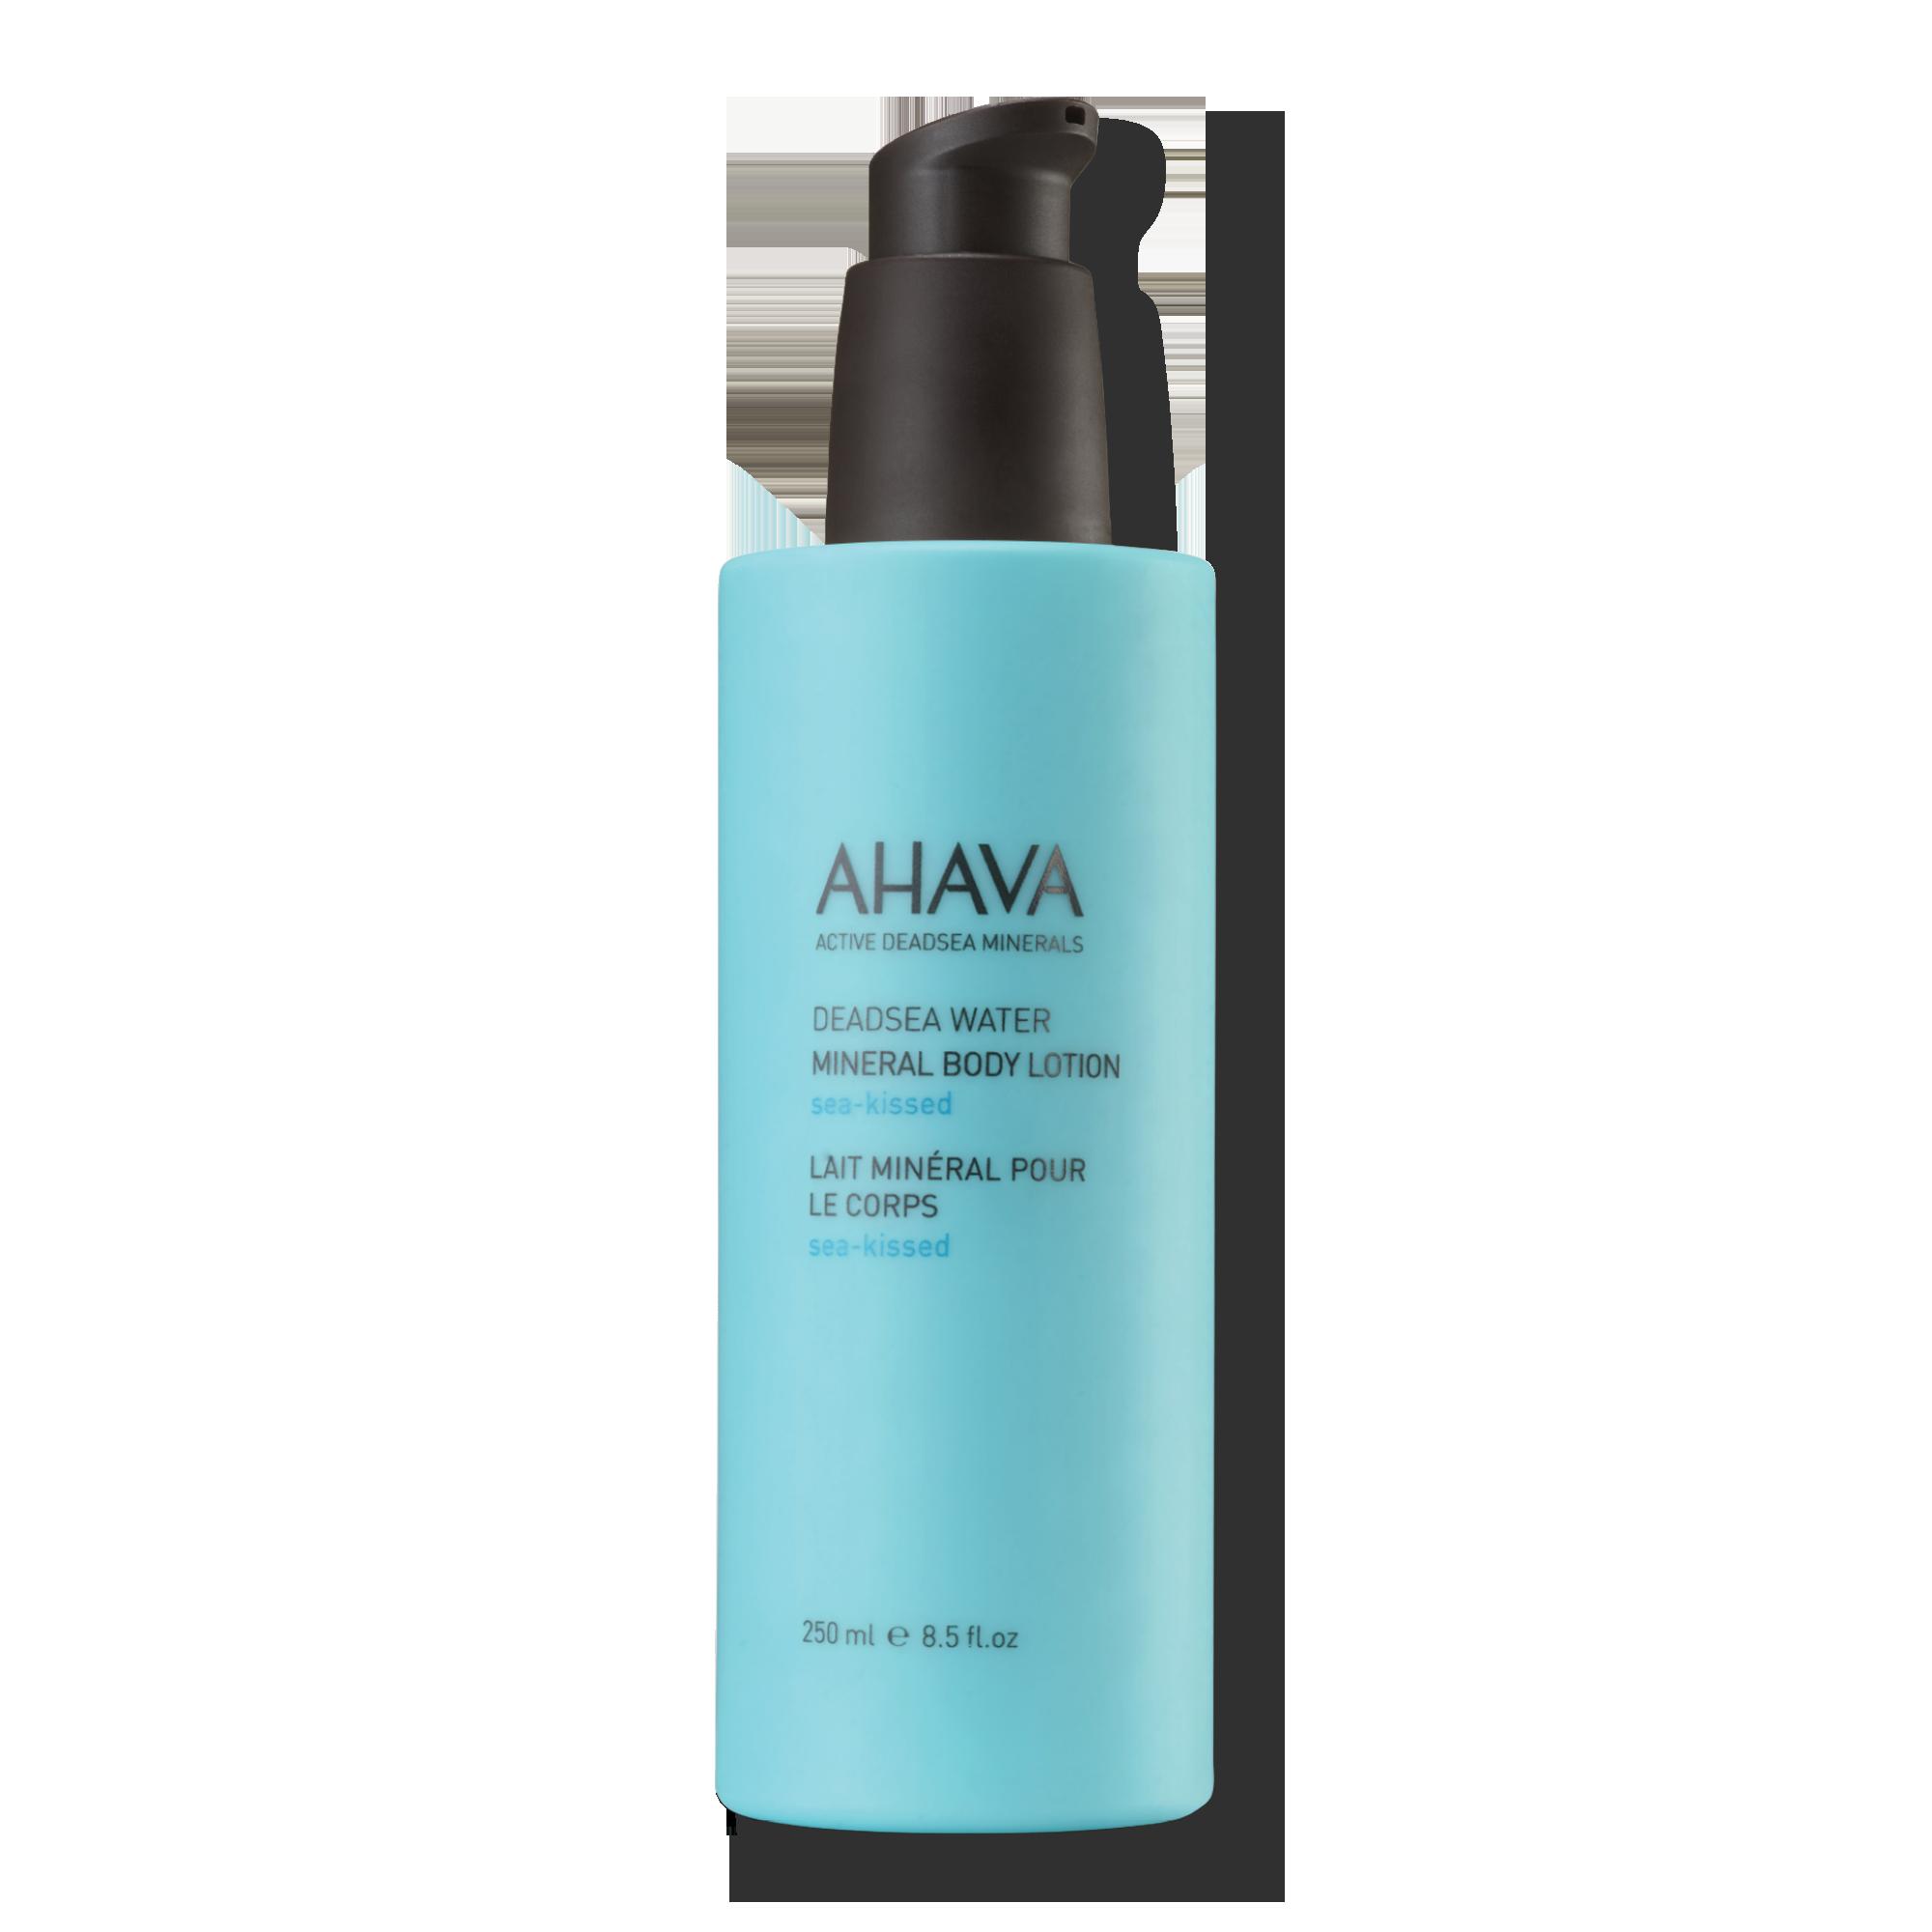 shipping $80 Ahava Shop Discount Lotion and orders free or at Online salebath.com Sea-Kissed of Mineral on - more great prices Body for